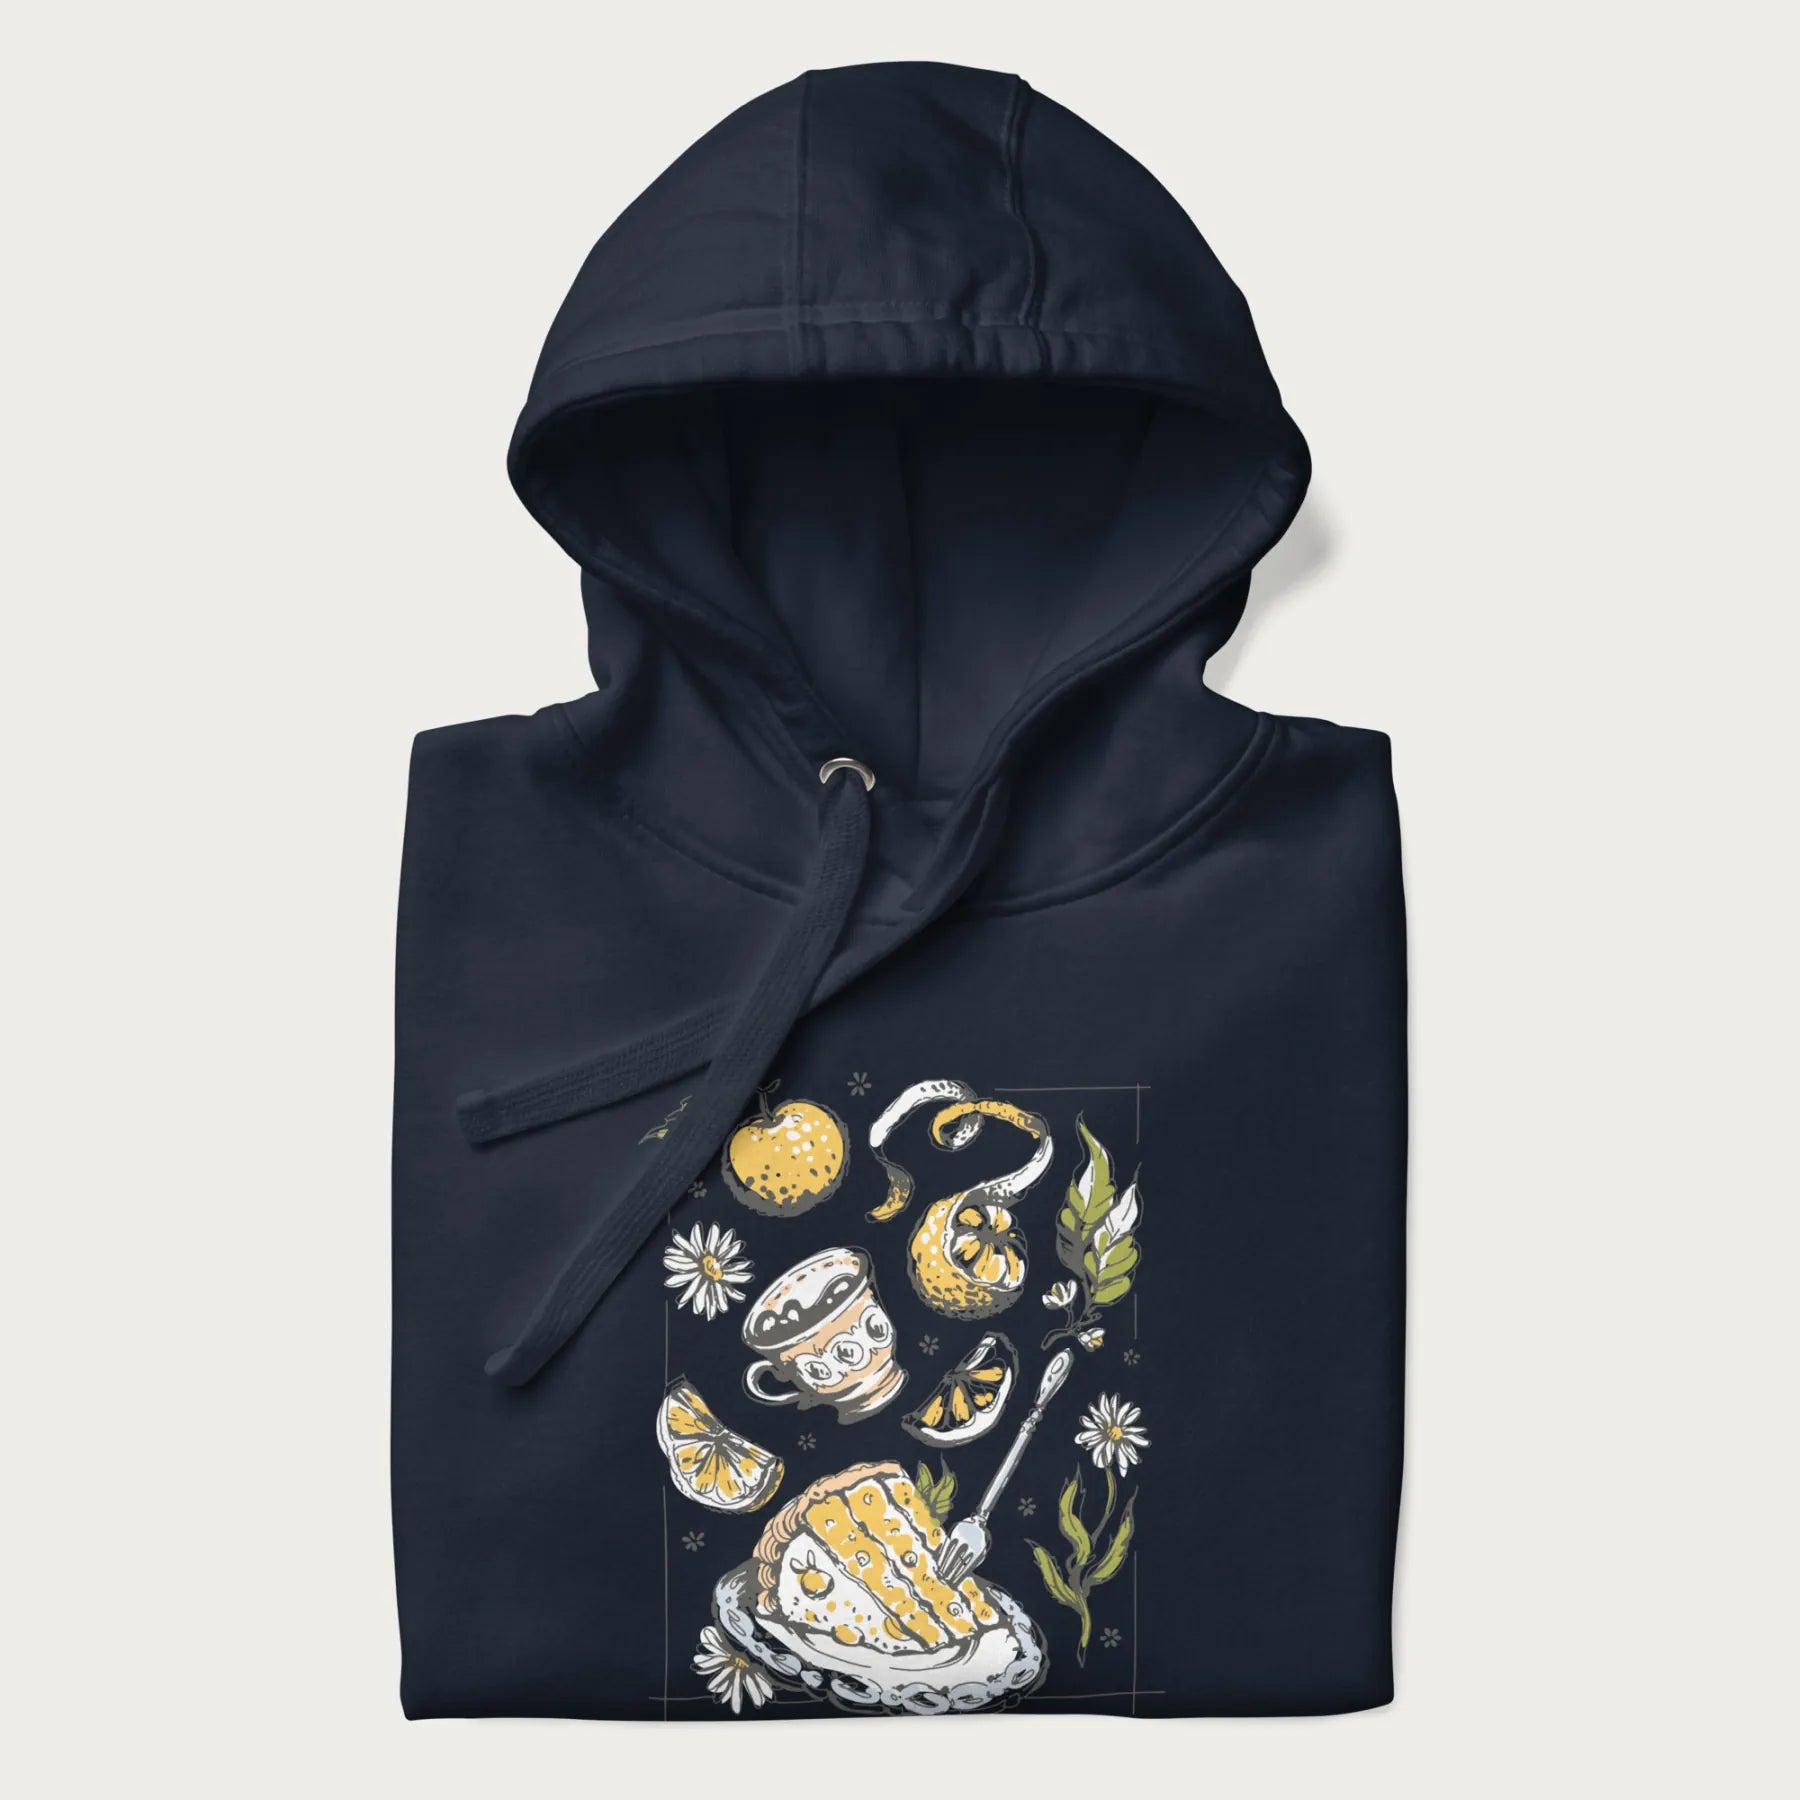 Folded navy blue hoodie featuring a Cottagecore-themed graphic with oranges, a floral porcelain cup, orange pie, and daisies.